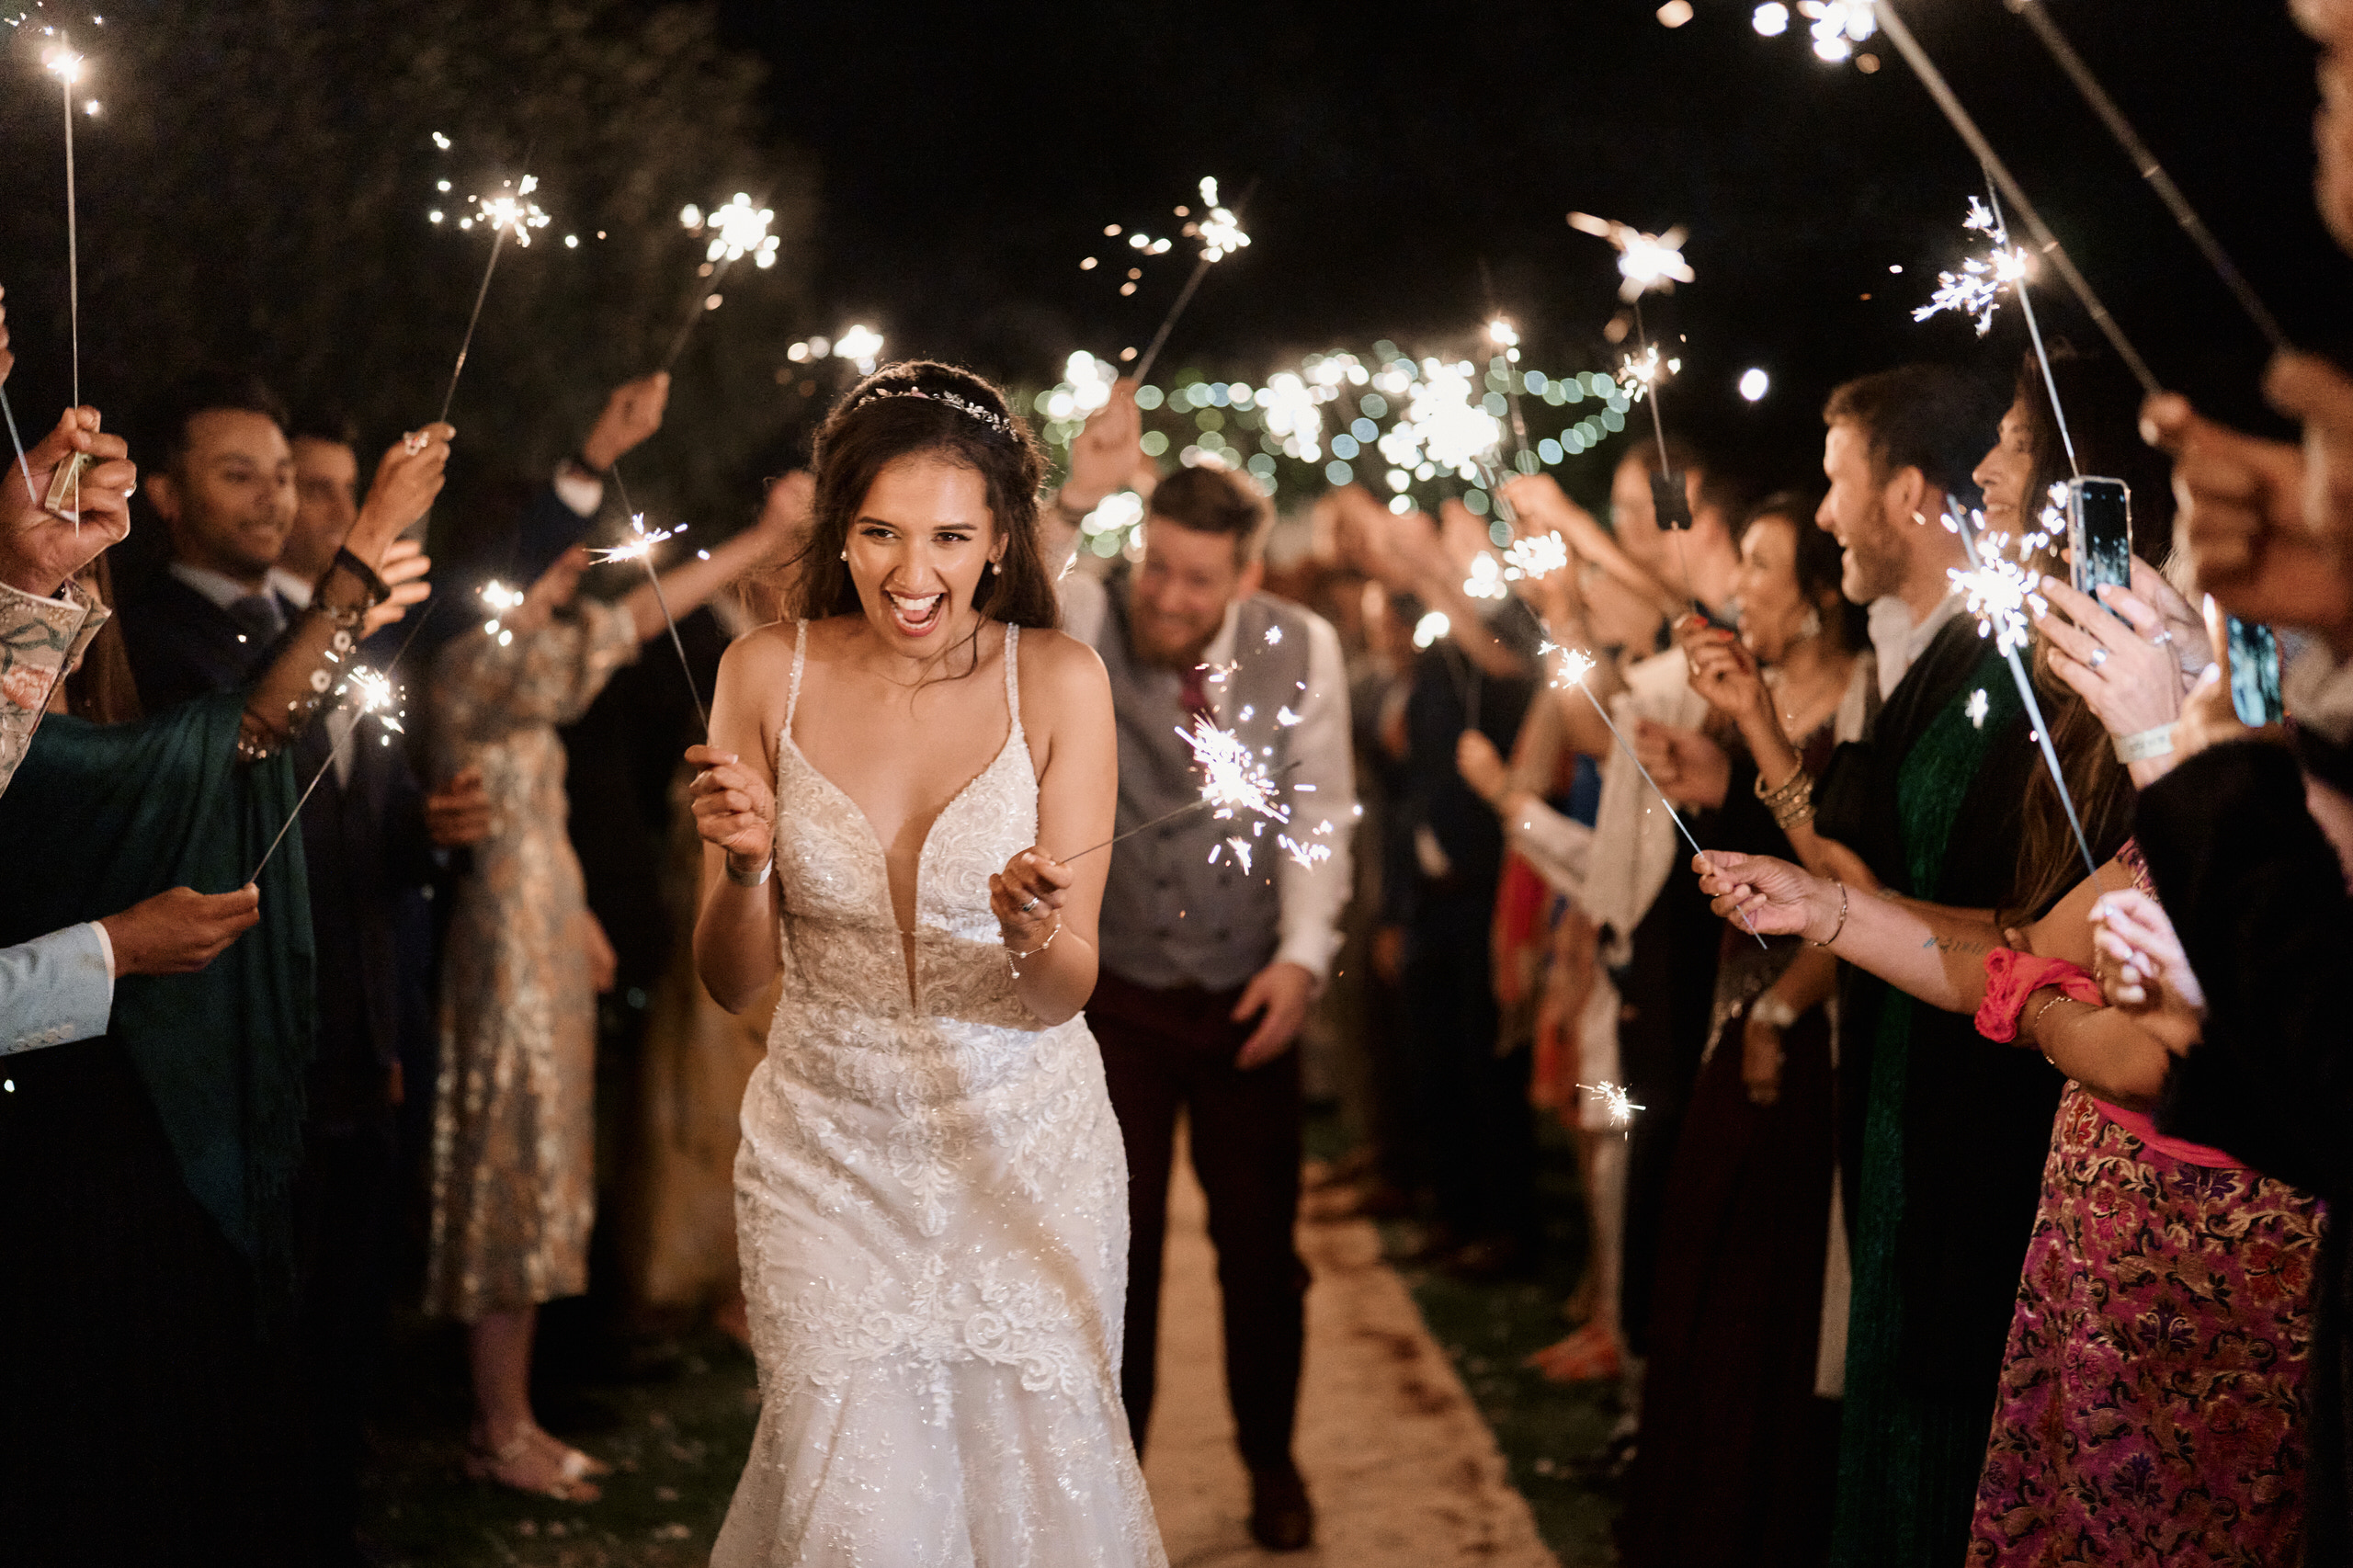 A couple getting married is walking down the aisle holding sparklers.